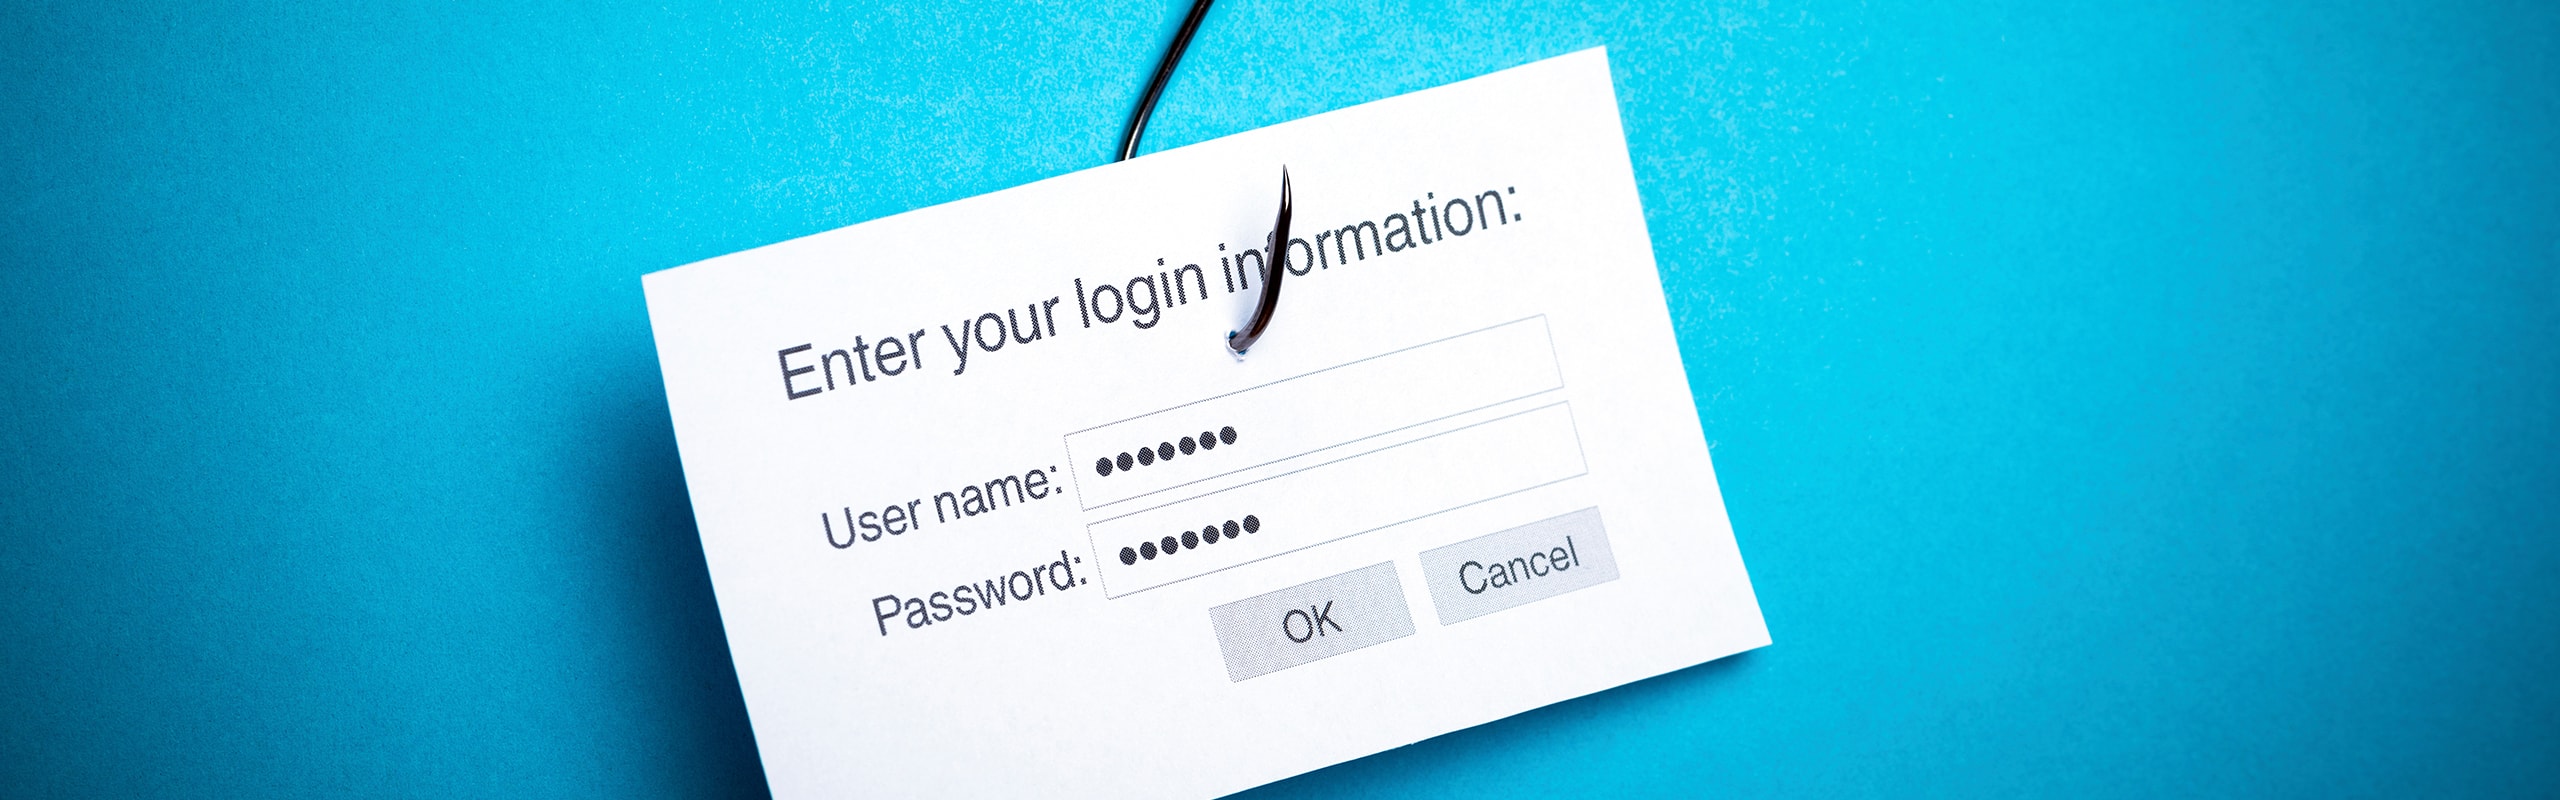 Avoid employee information being hacked